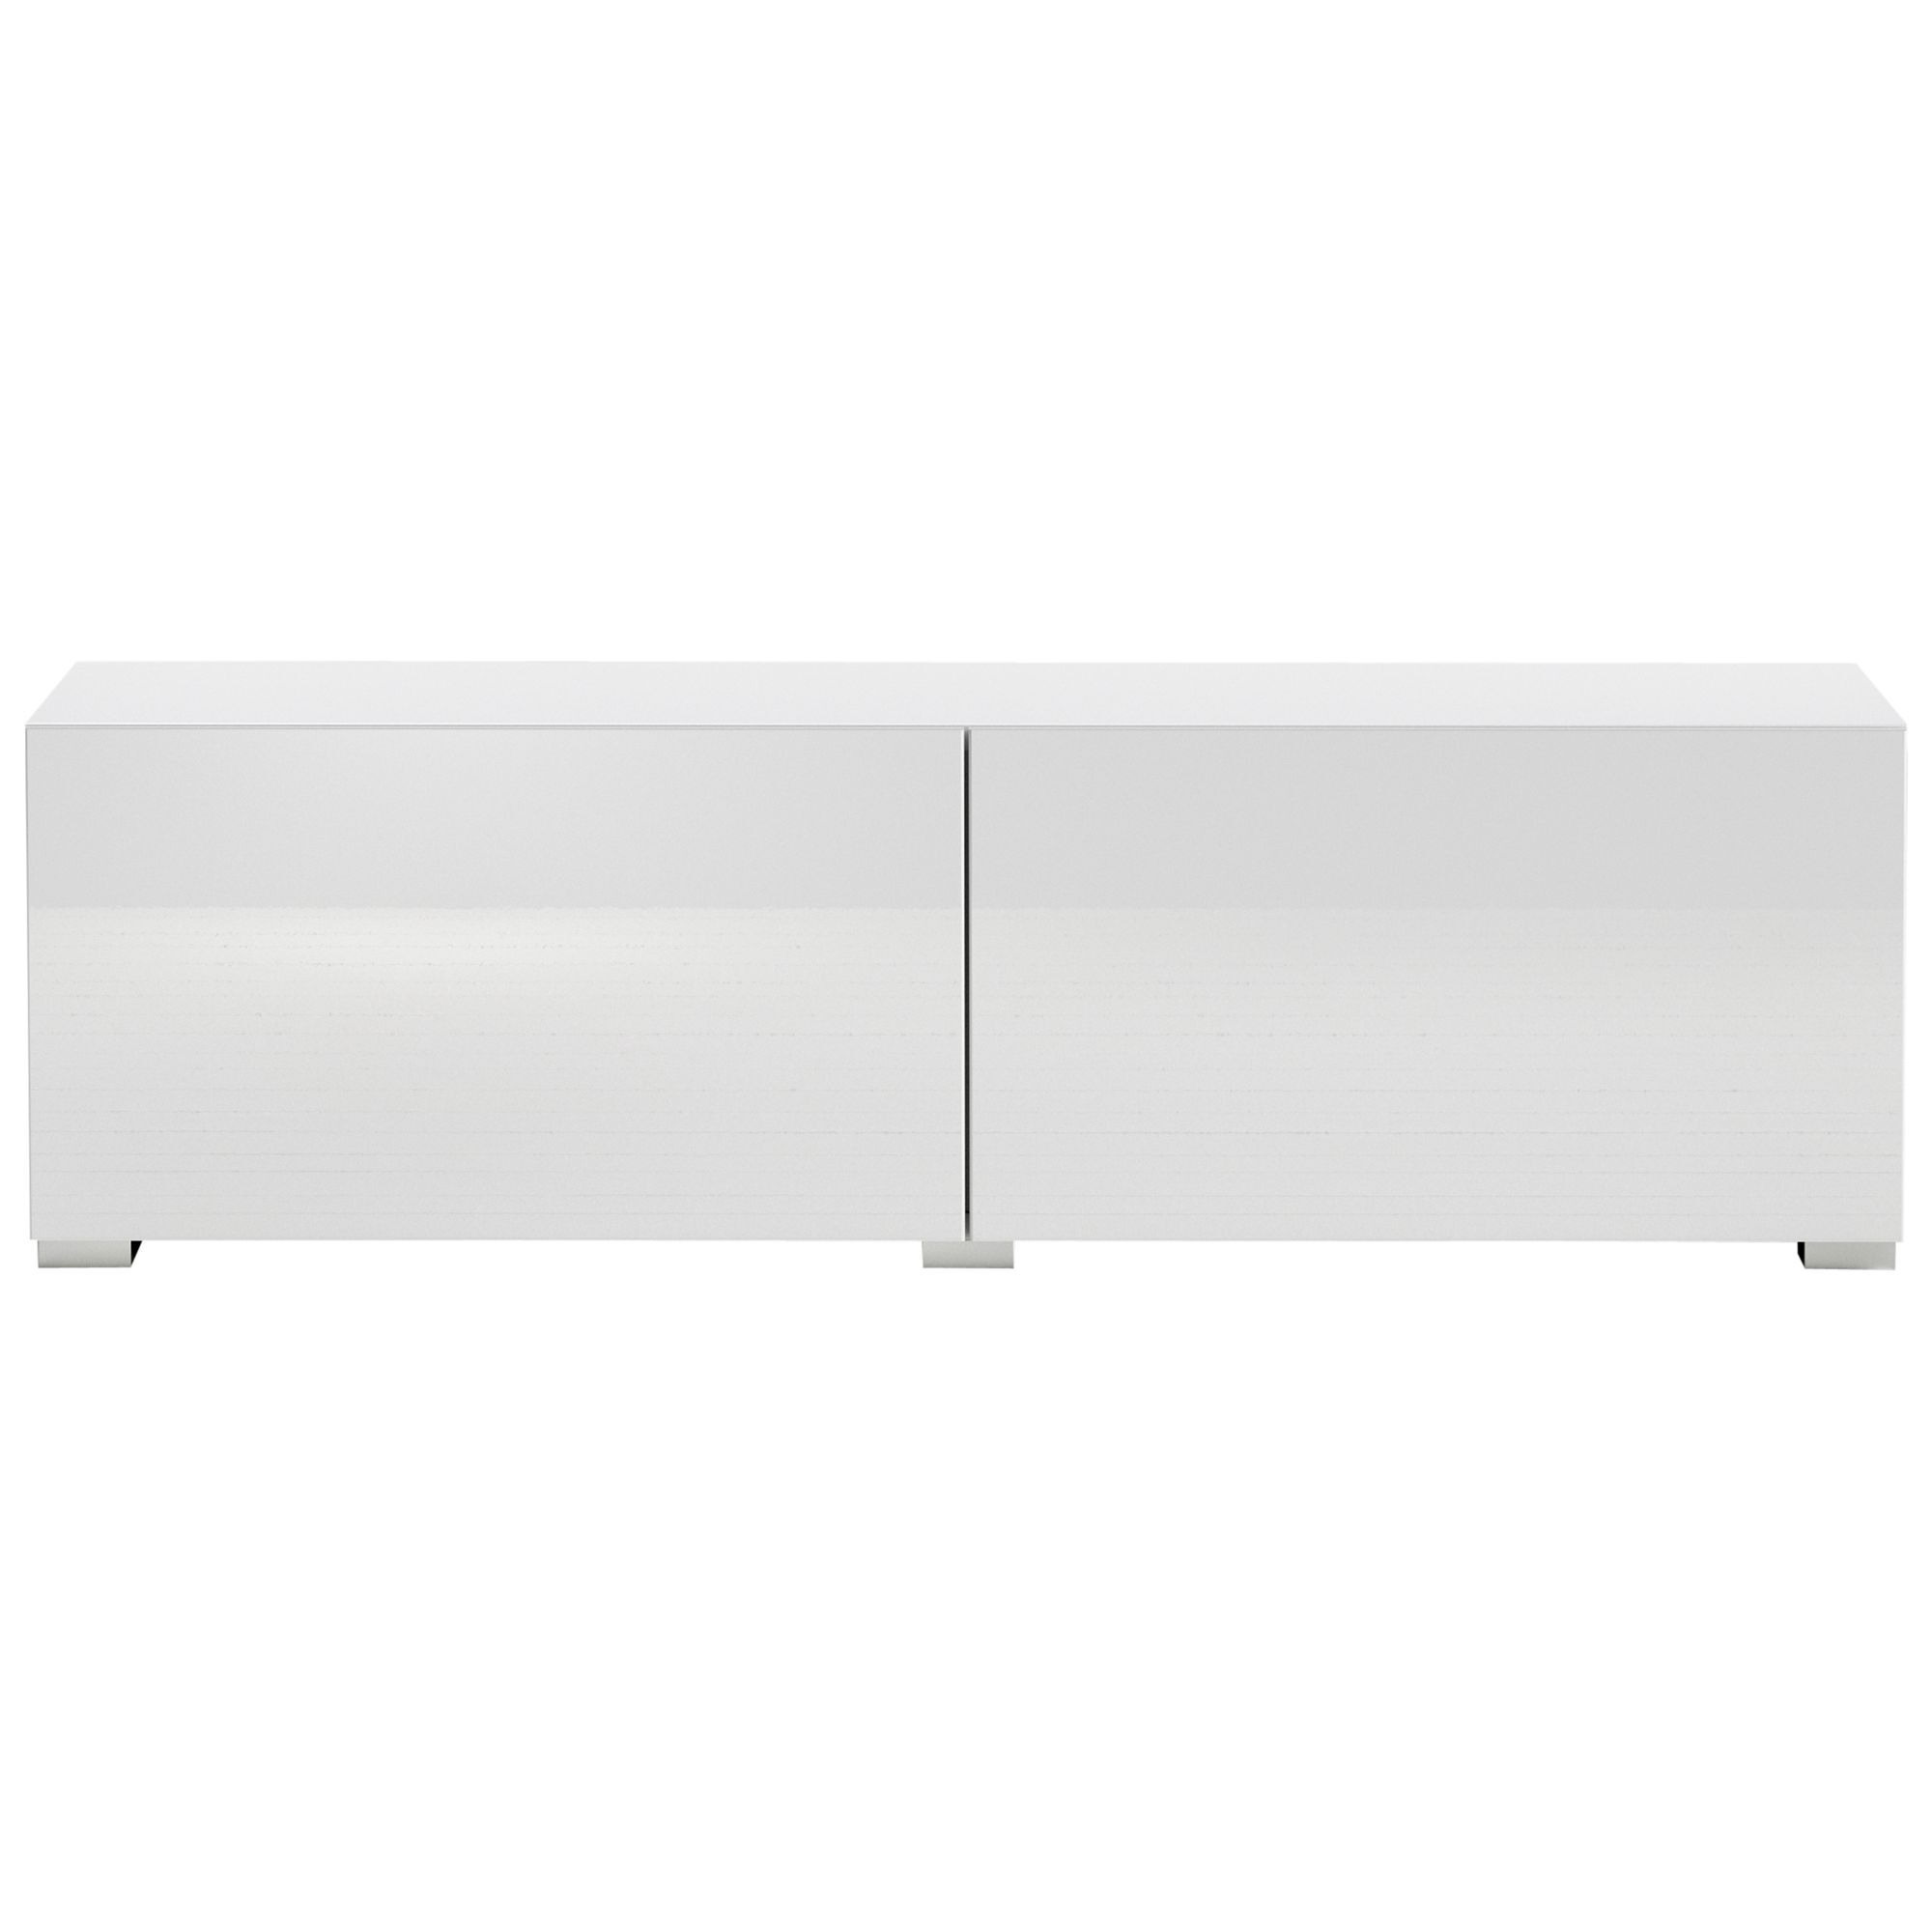 John Lewis ANYDAY Match Low wide Shelf Unit White & Gloss White Doors - image 1